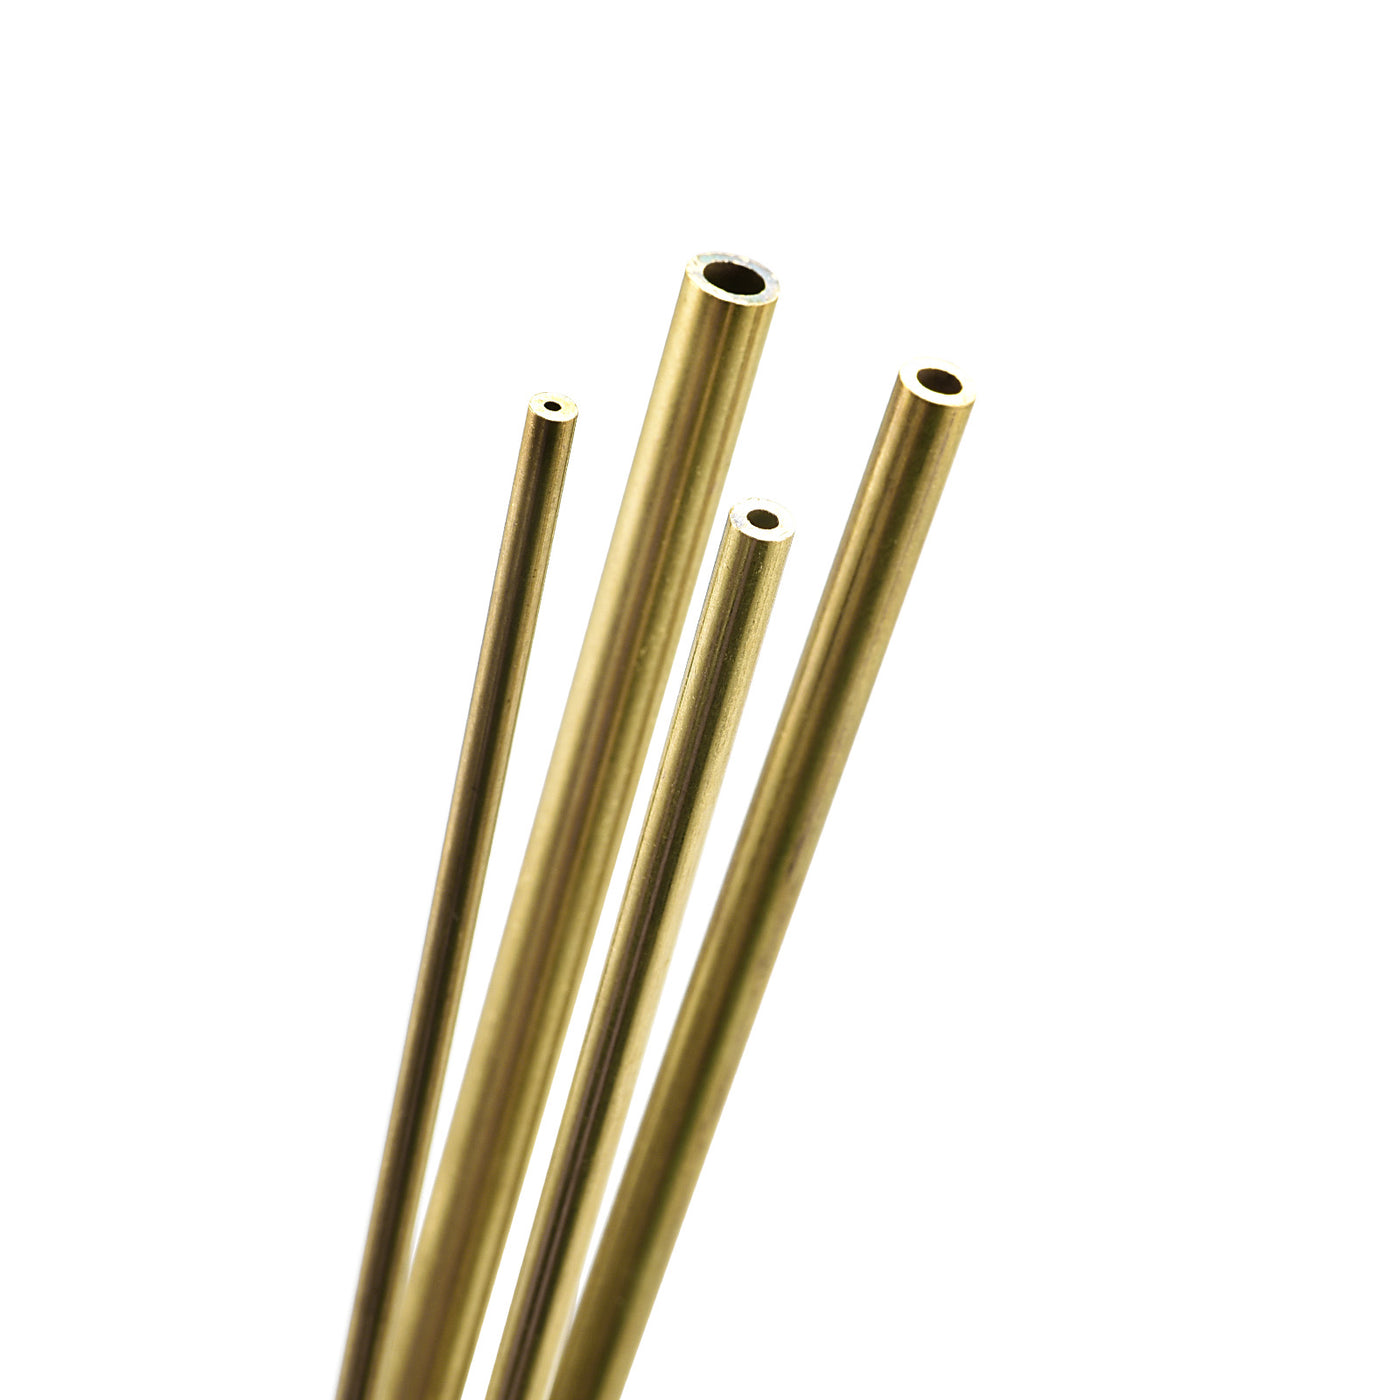 uxcell Uxcell Brass Tube, 3mm 4mm 5mm 6mm OD x 1mm Wall Thickness 300mm Length Metal Tubing, Pack of 4